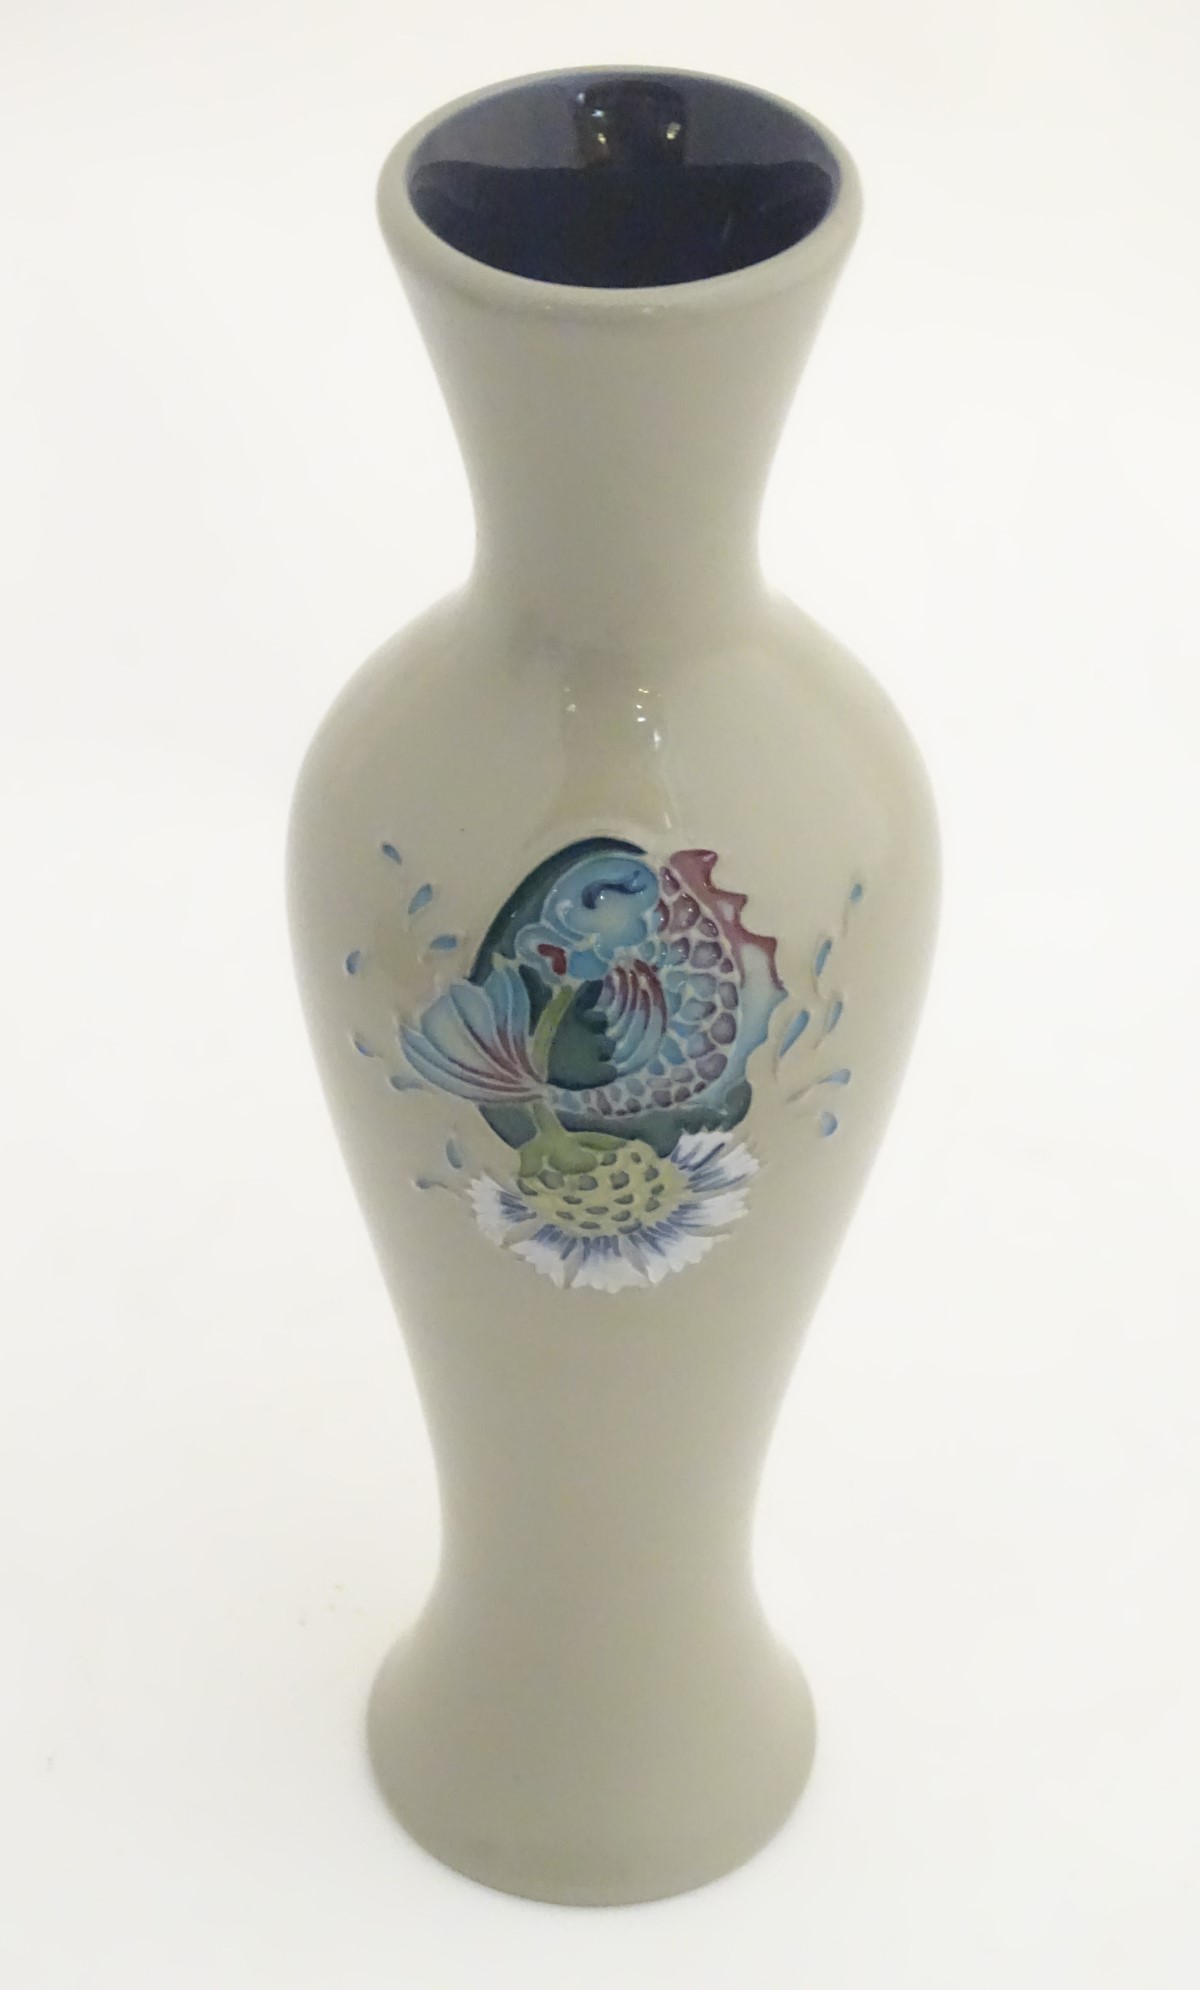 A Moorcroft vase in the shape no. 93/12 decorated with a fish and thistle design. - Image 5 of 8